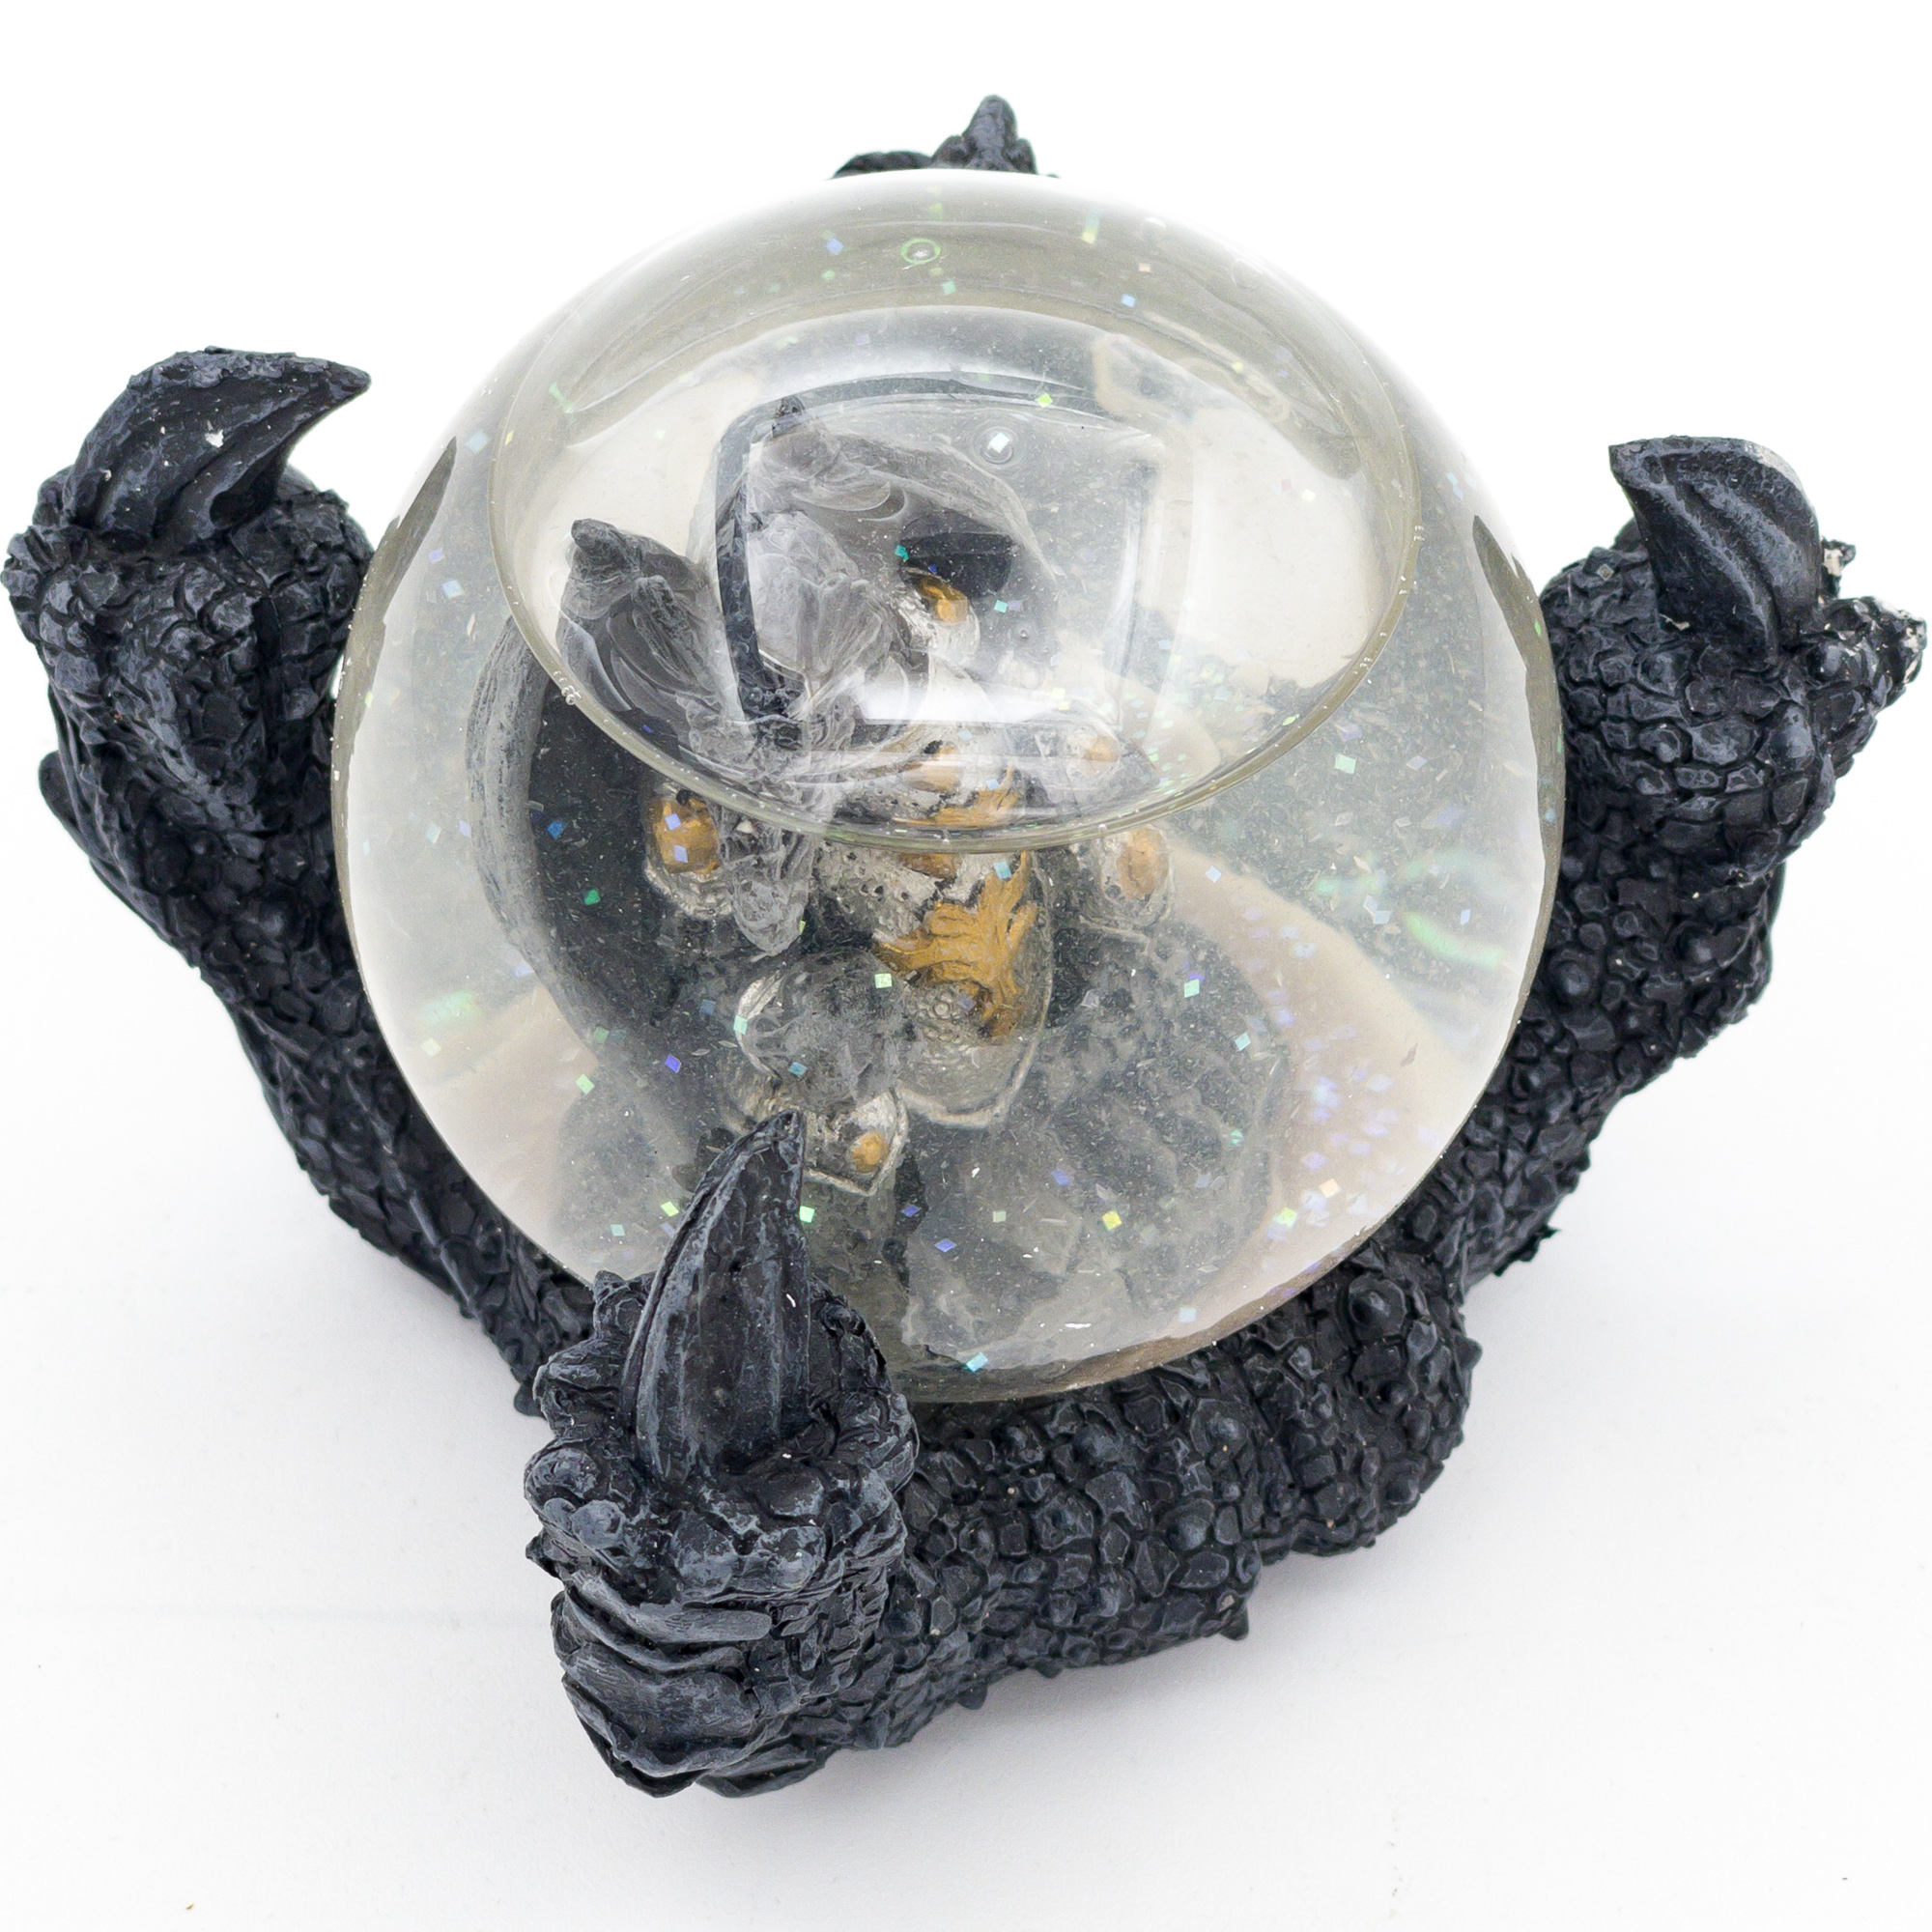 Ruins in Palm DRAGON Claw Novelty Snow Globe